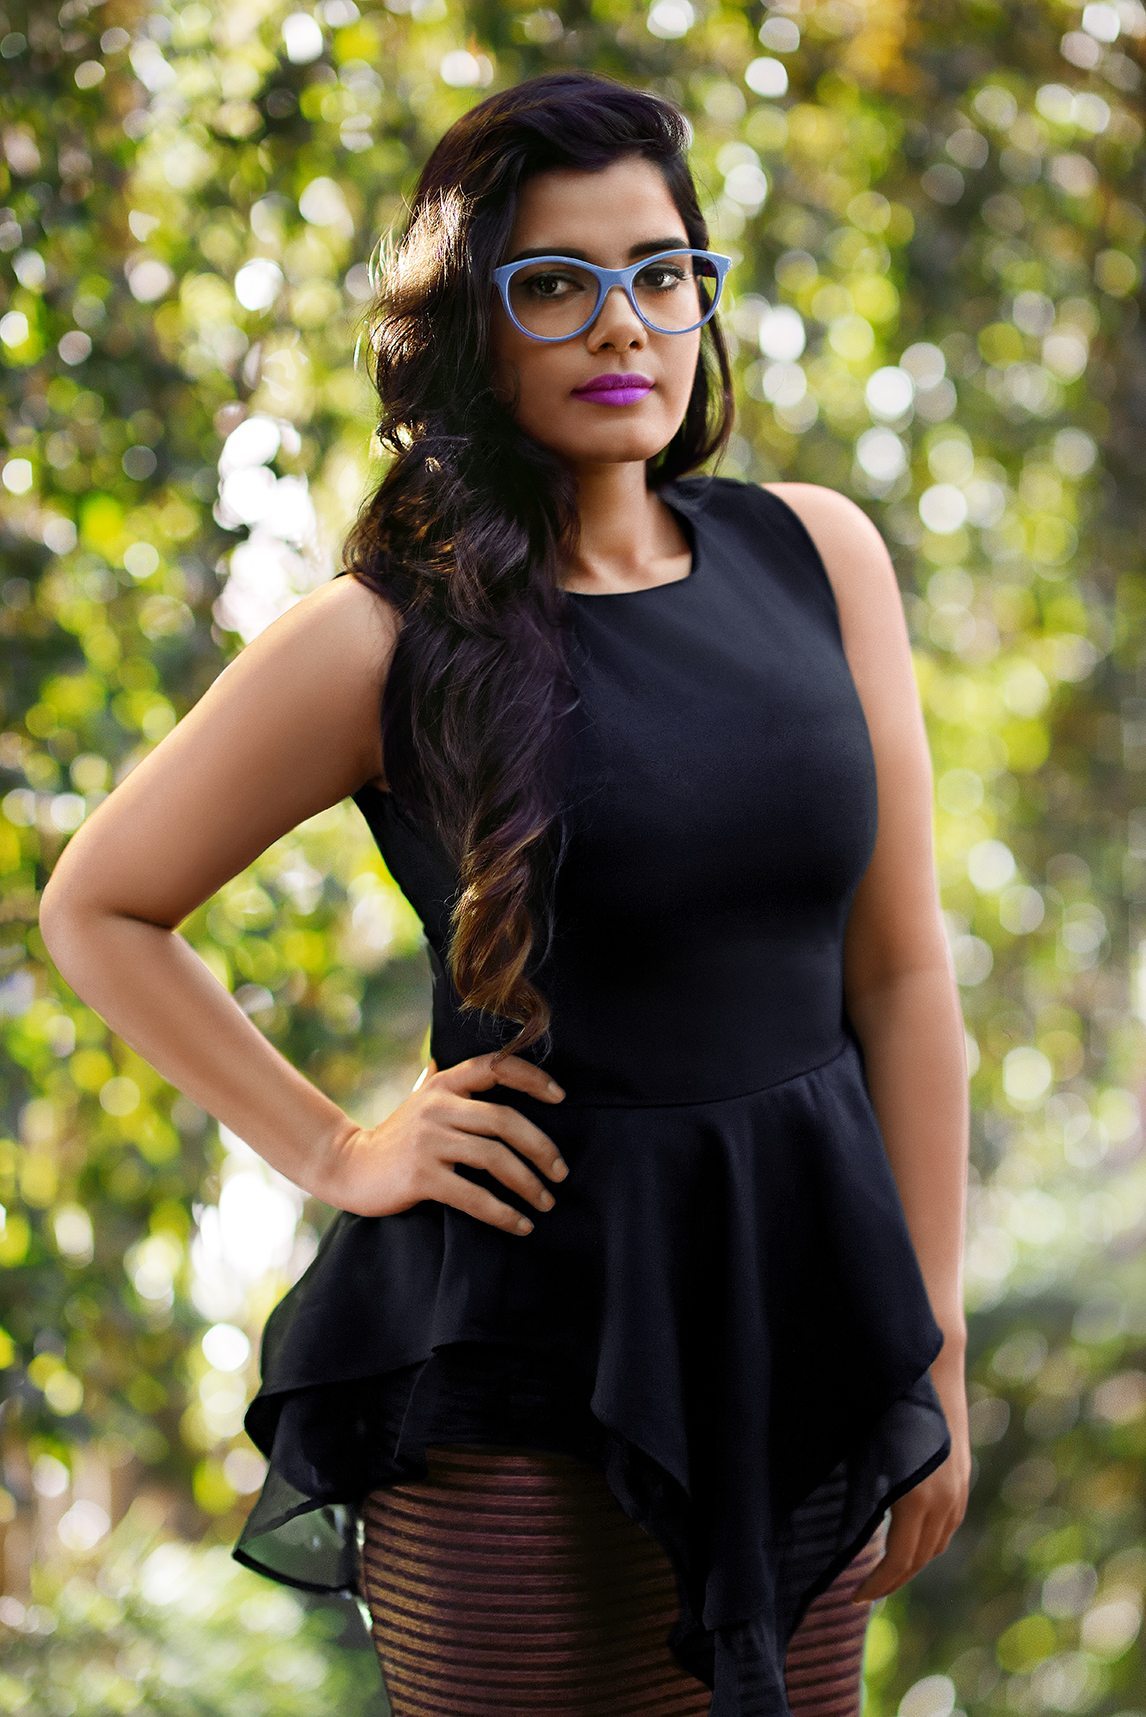 #InVogueEyeWear Behind The Scenes Photography for Luxottica India, Naina.co, Luxury Photographer, Lifestyle Photographer, Experience Collector, Naina Redhu, On Assignment, Professional Photographer, Blogger, Atul Kasbekar